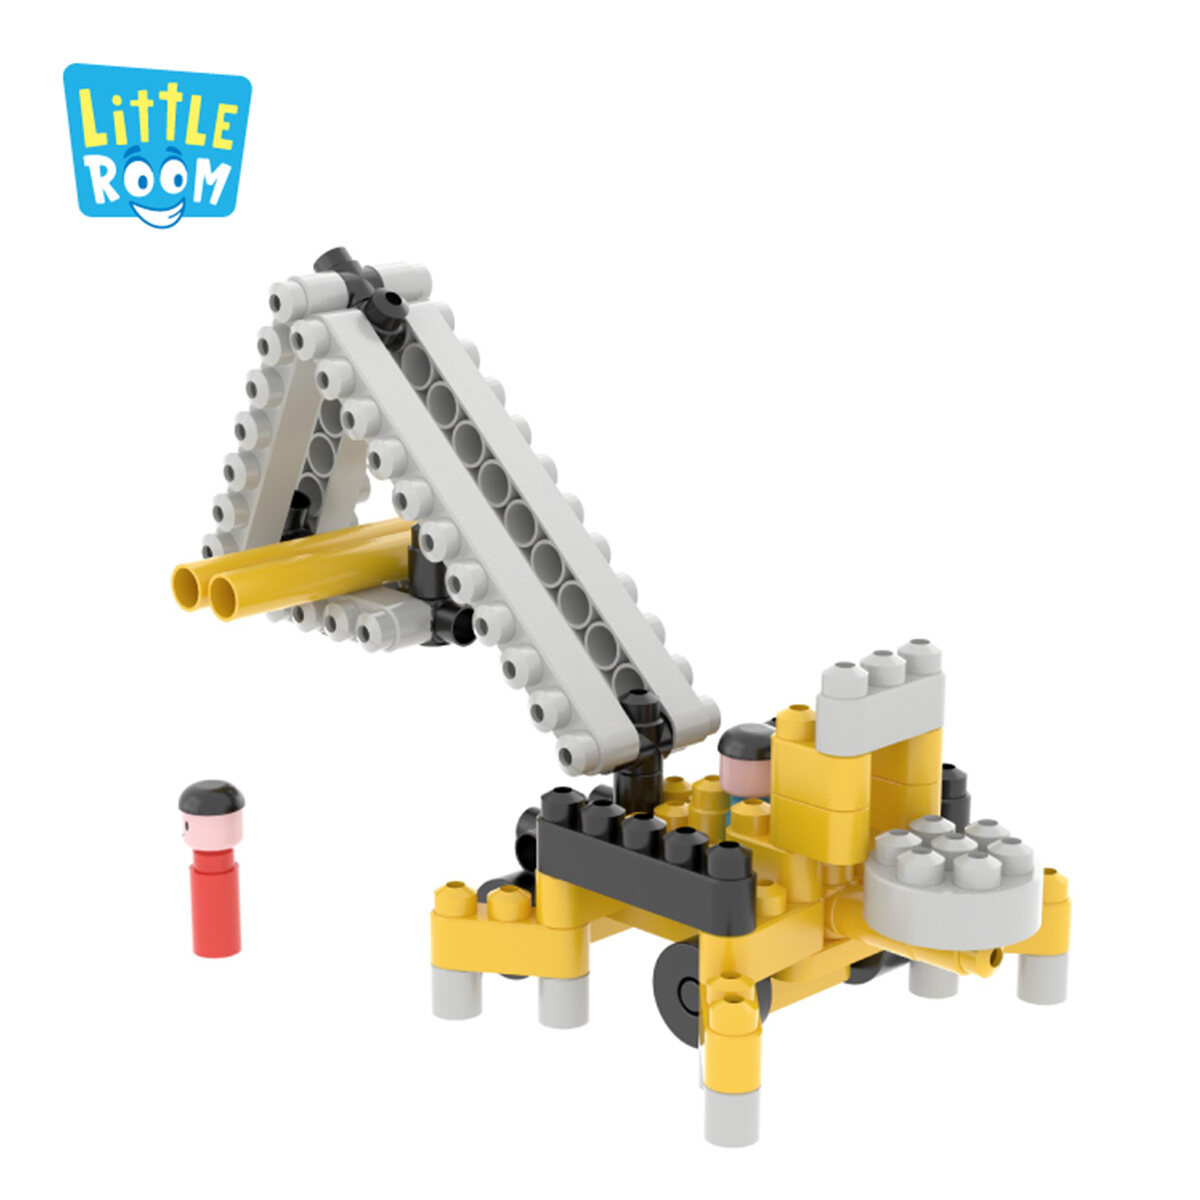 construction site toys for toddlers, wooden construction site toy